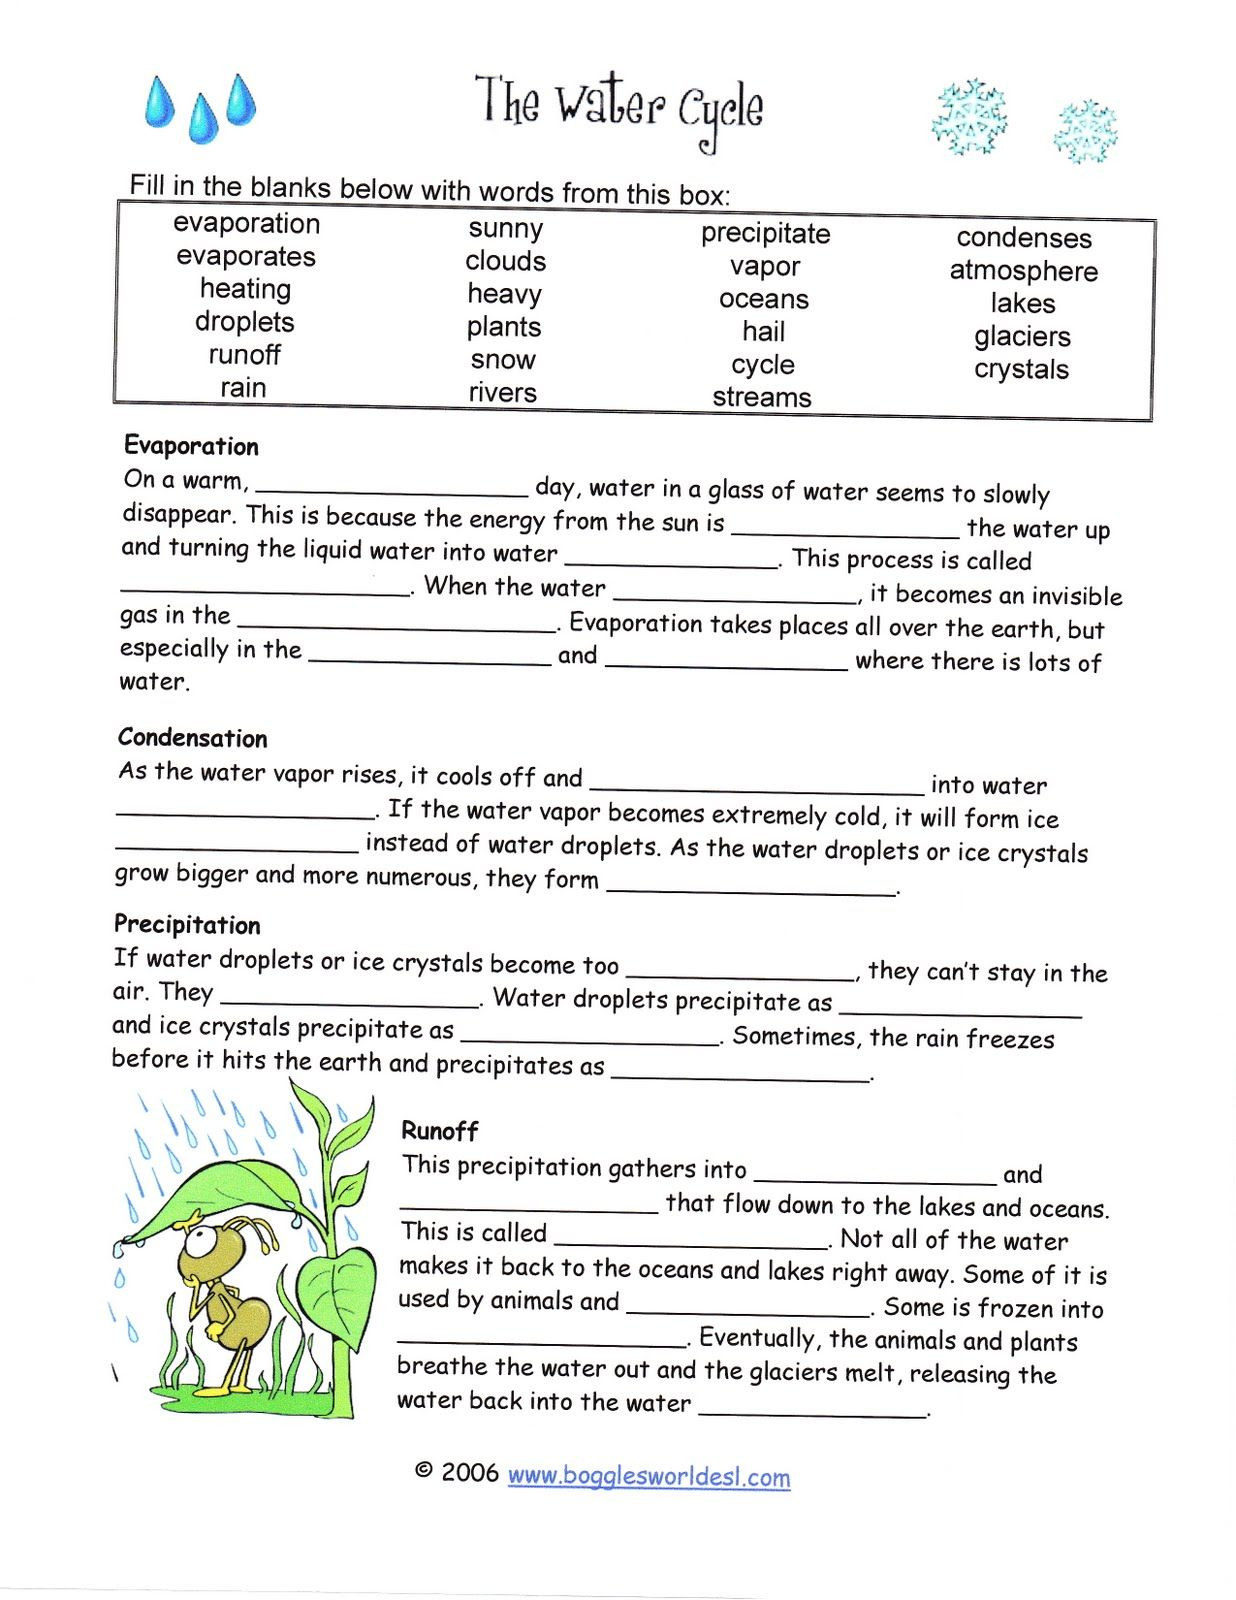 Science World Worksheet Answers the Water Cycle Worksheet Answers Free Worksheets Library Bi